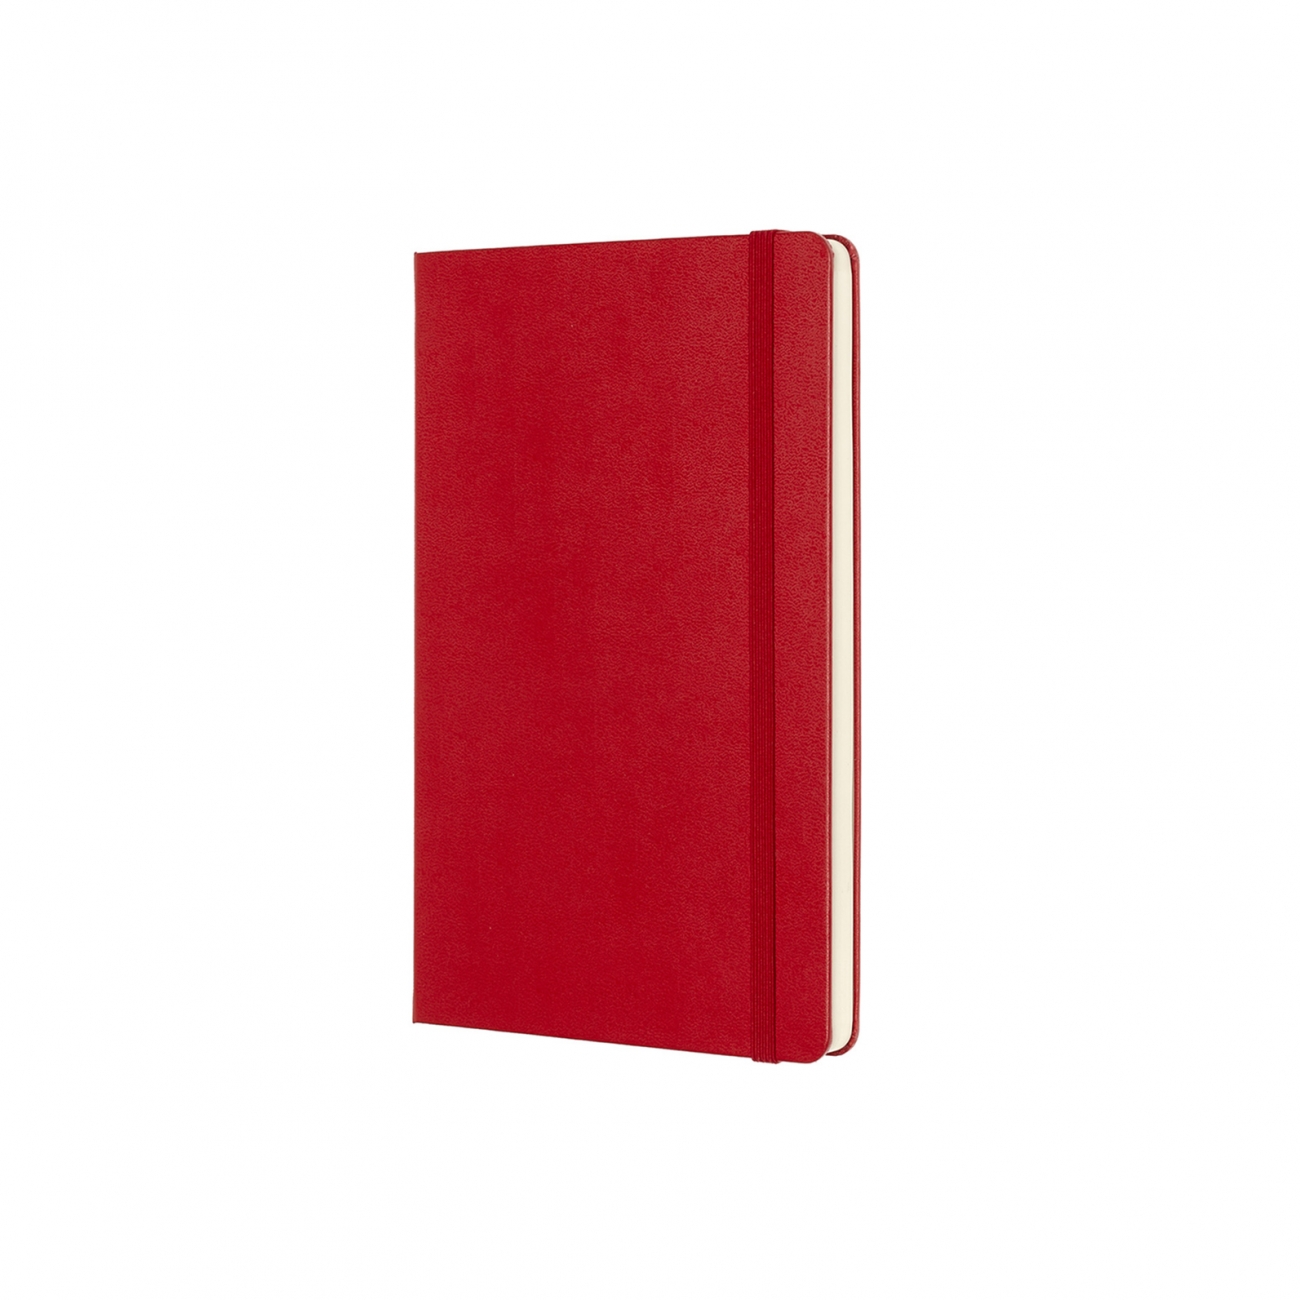 CLASSIC HARD COVER NOTEBOOK - PLAIN - LARGE - SCARLET RED